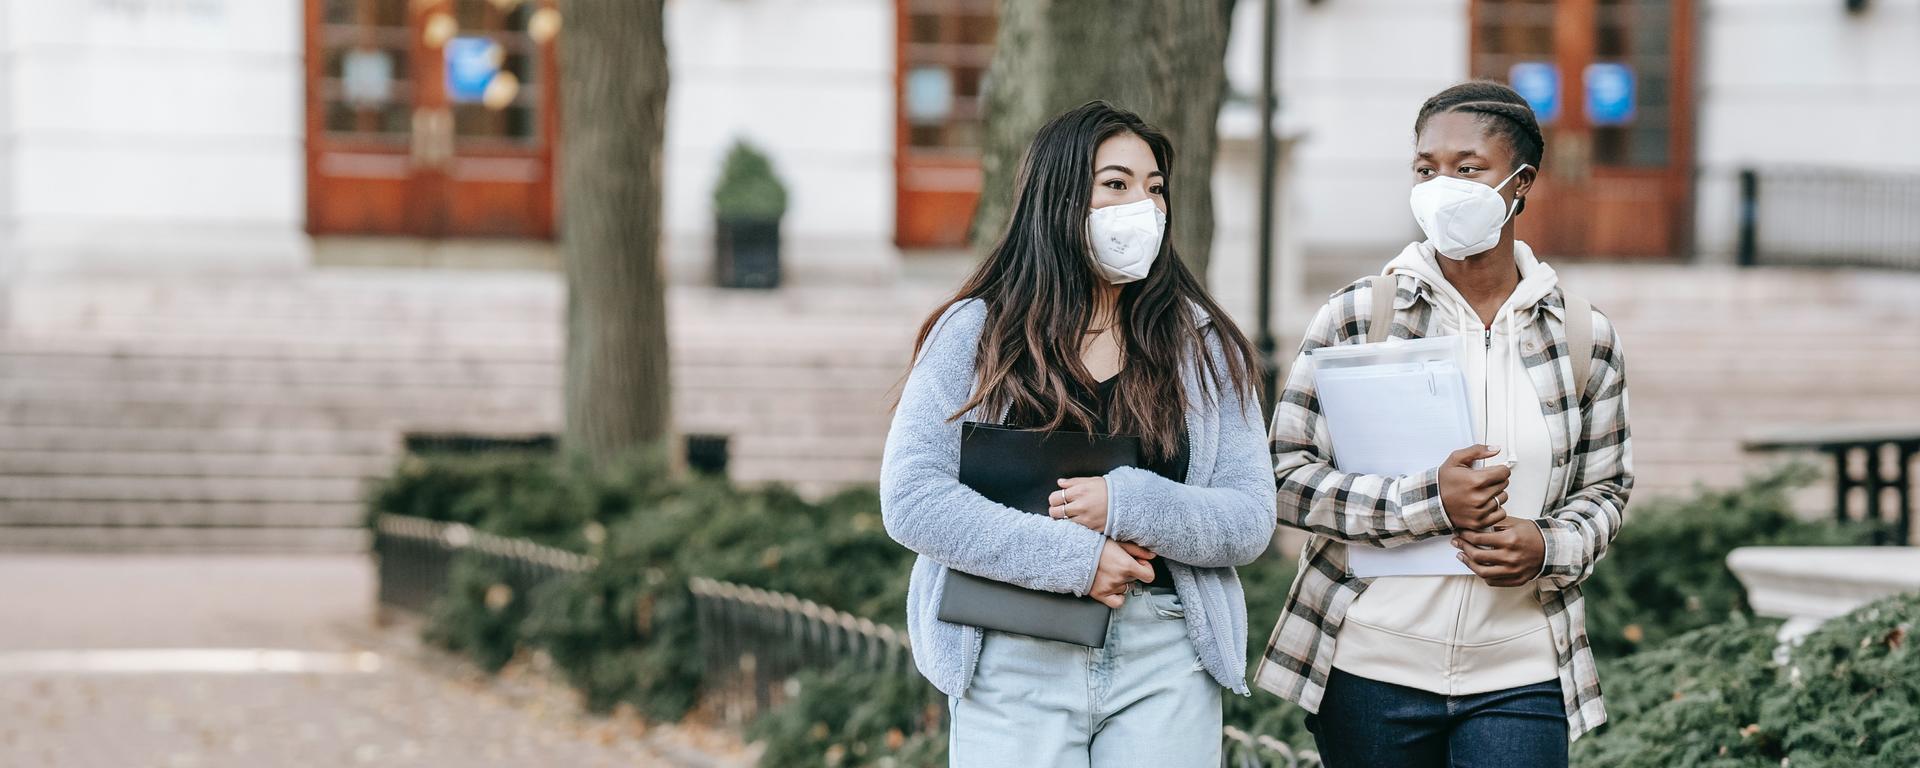 Two young women walk on a campus caryring books and wearing masks